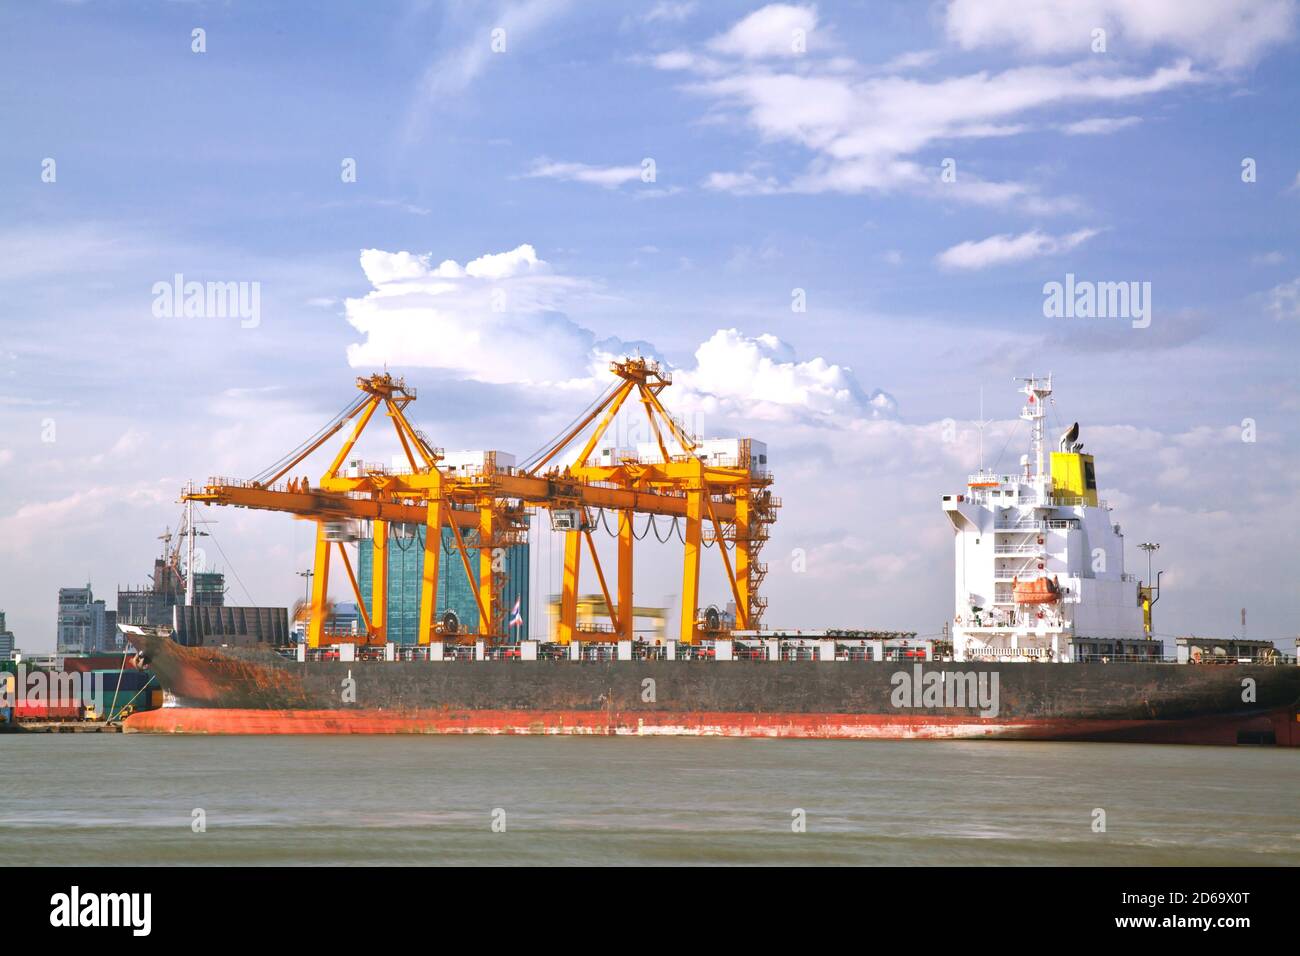 Container Cargo freight Industrail ship with working crane bridge unloading and loading goods in Bangkok shipyard Terminal for Logistic Import Export Stock Photo